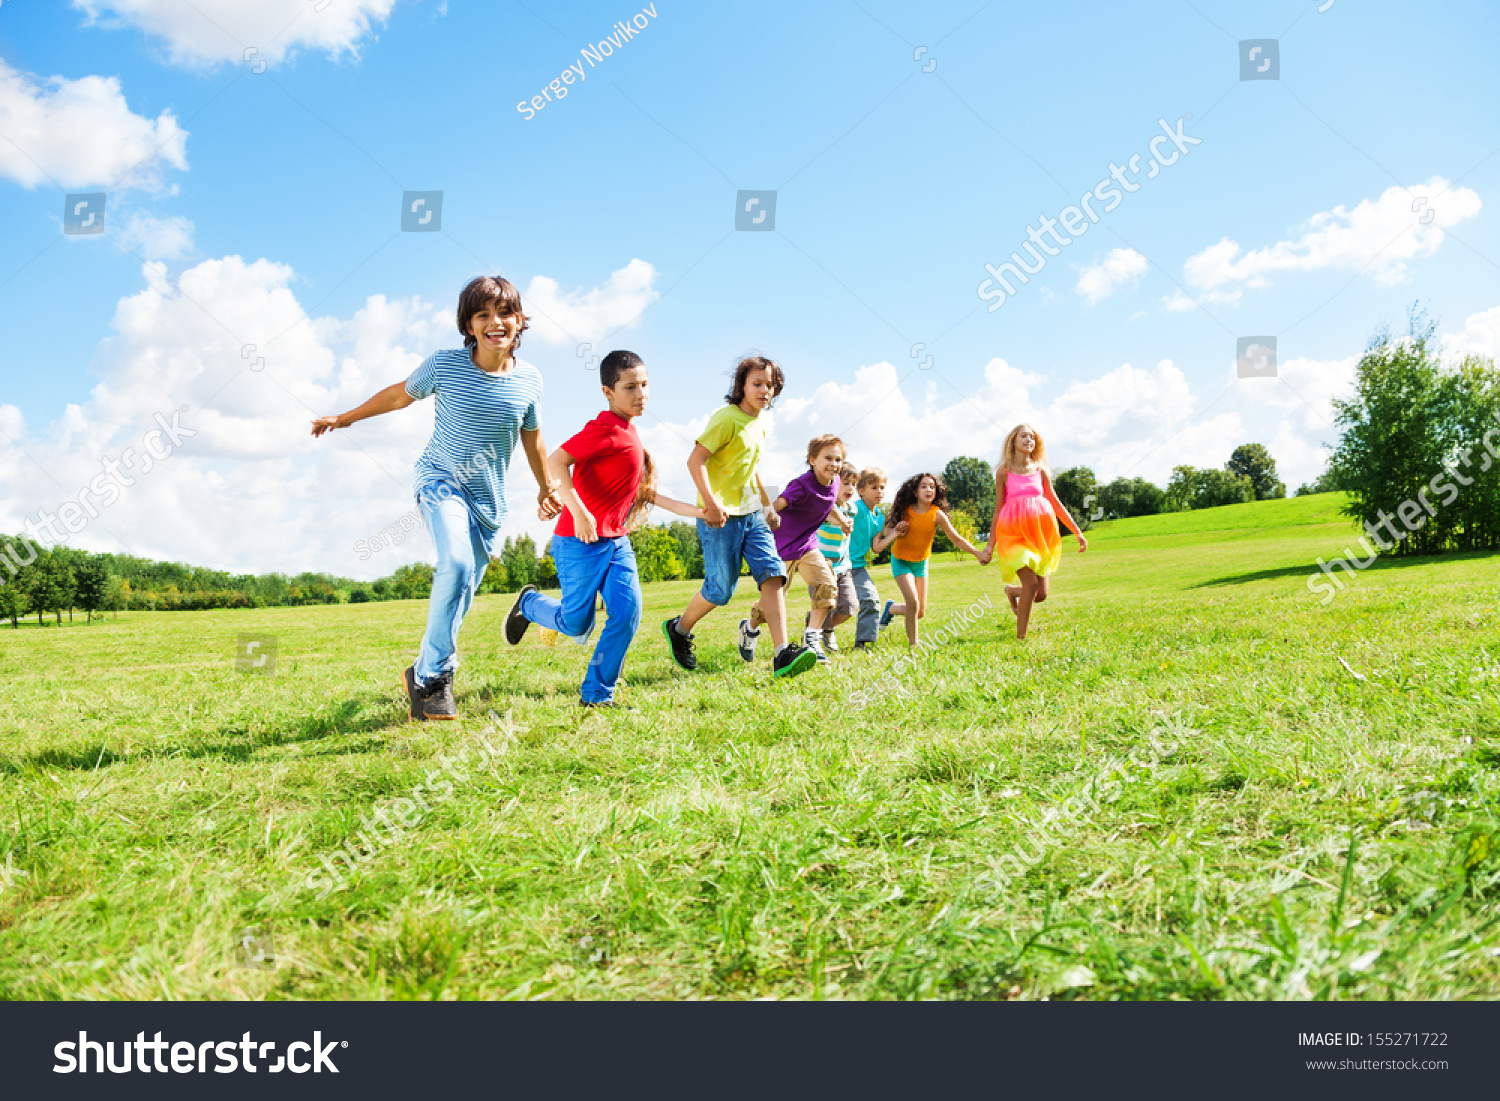 Large group of happy kids, boys and girls running in the park on sunny summer day in casual clothes #155271722